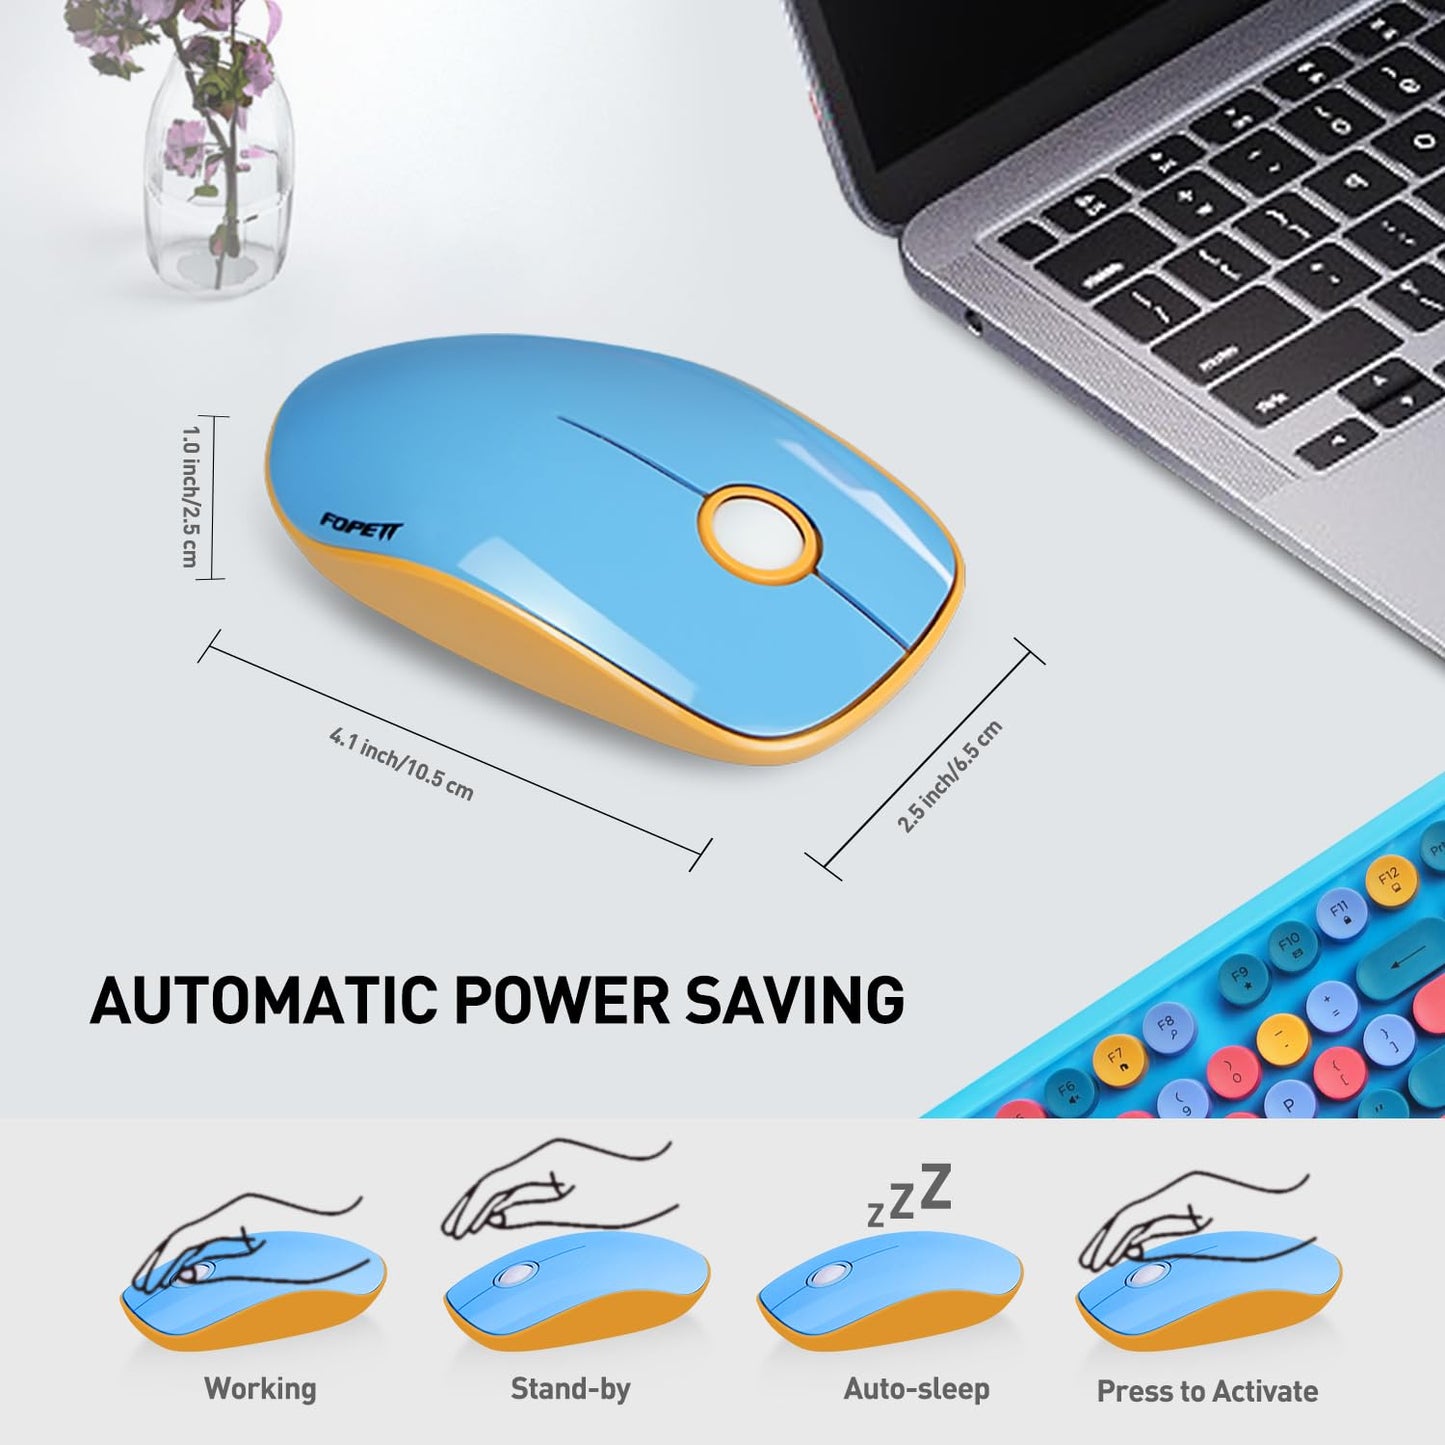 FOPETT 2.4GHz Wireless Keyboard and Mouse Set with Switch Button - Full-Size Keyboard - Compatible for Windows/Laptop/PC/Notebook/Smart TV and More - Blue Colorful